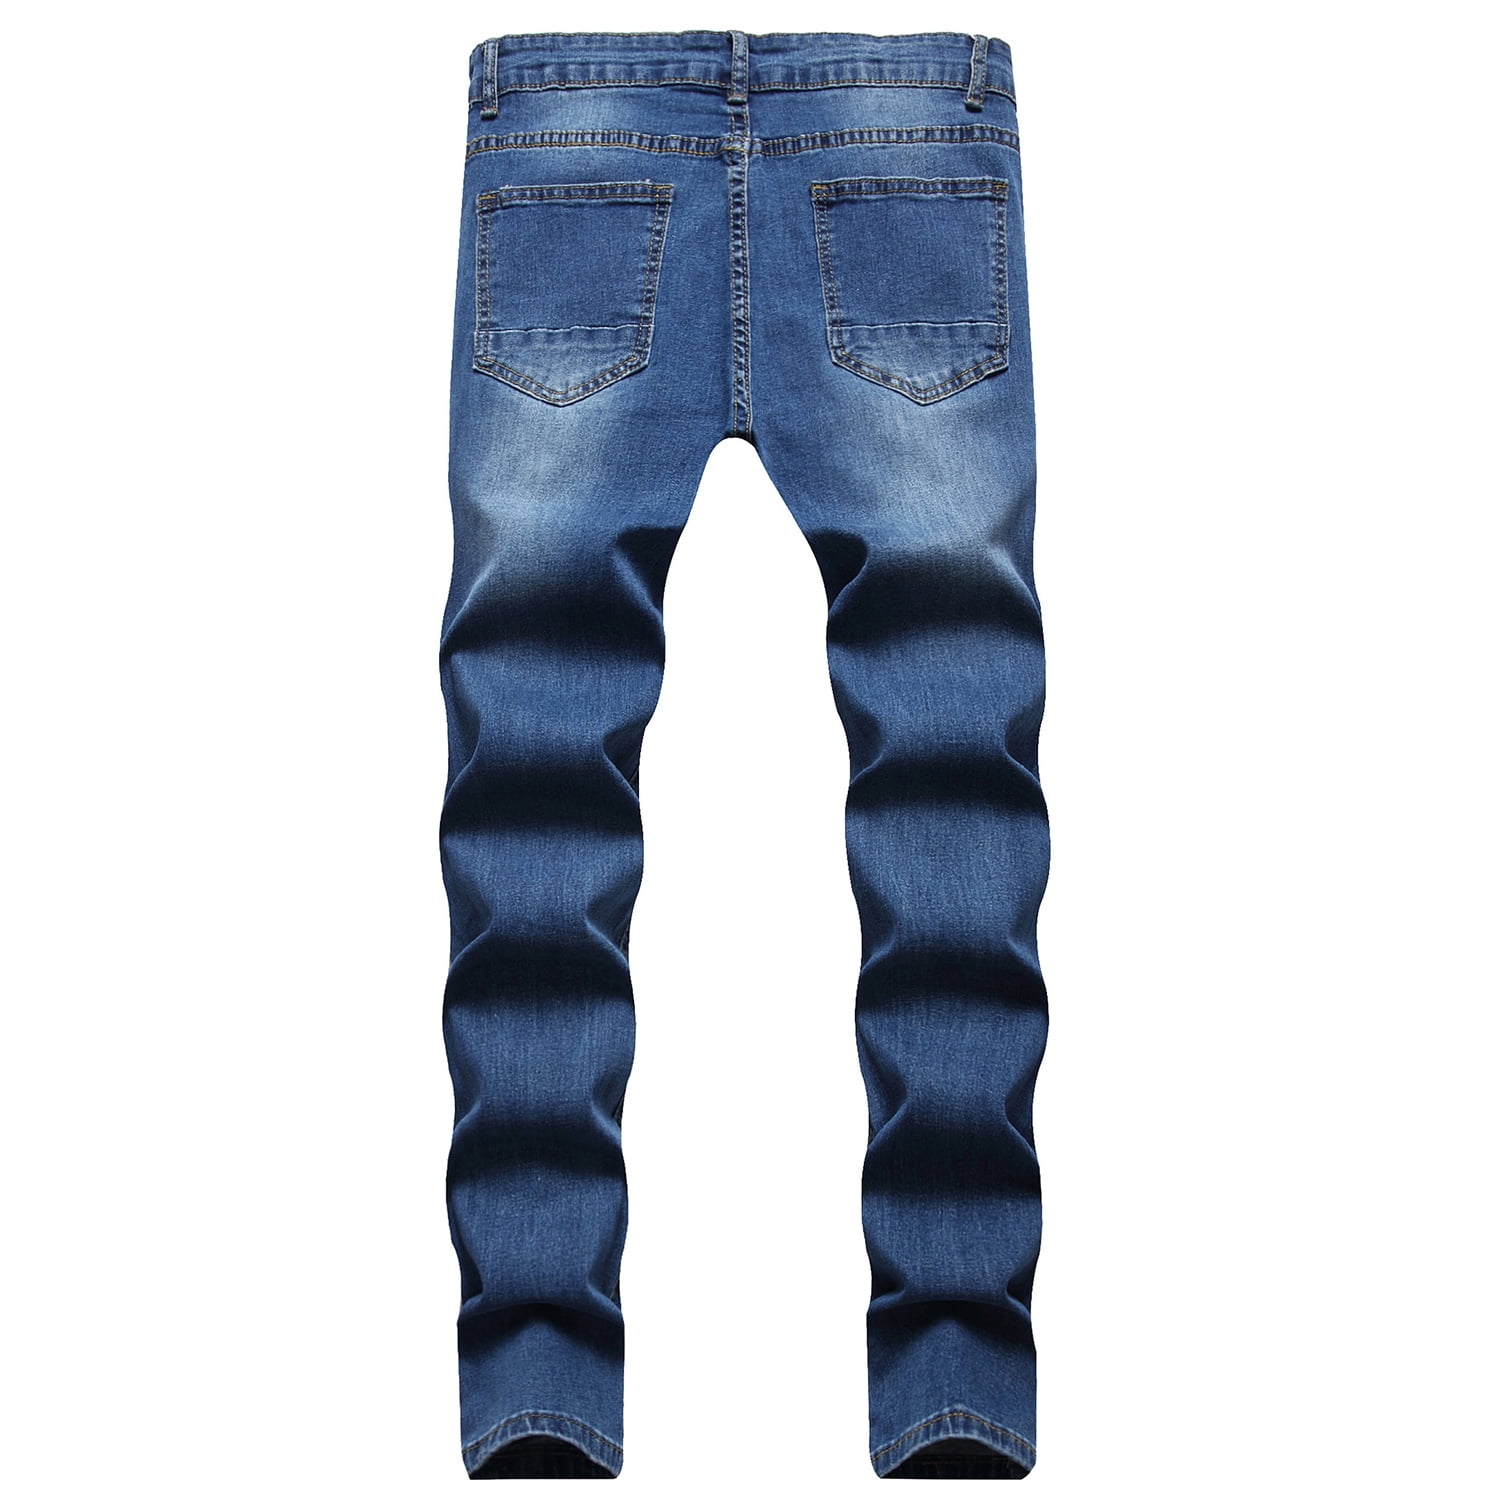 Lu's Chic Men's Distressed Jeans Slim Fit Pants Mid Rise Trousers